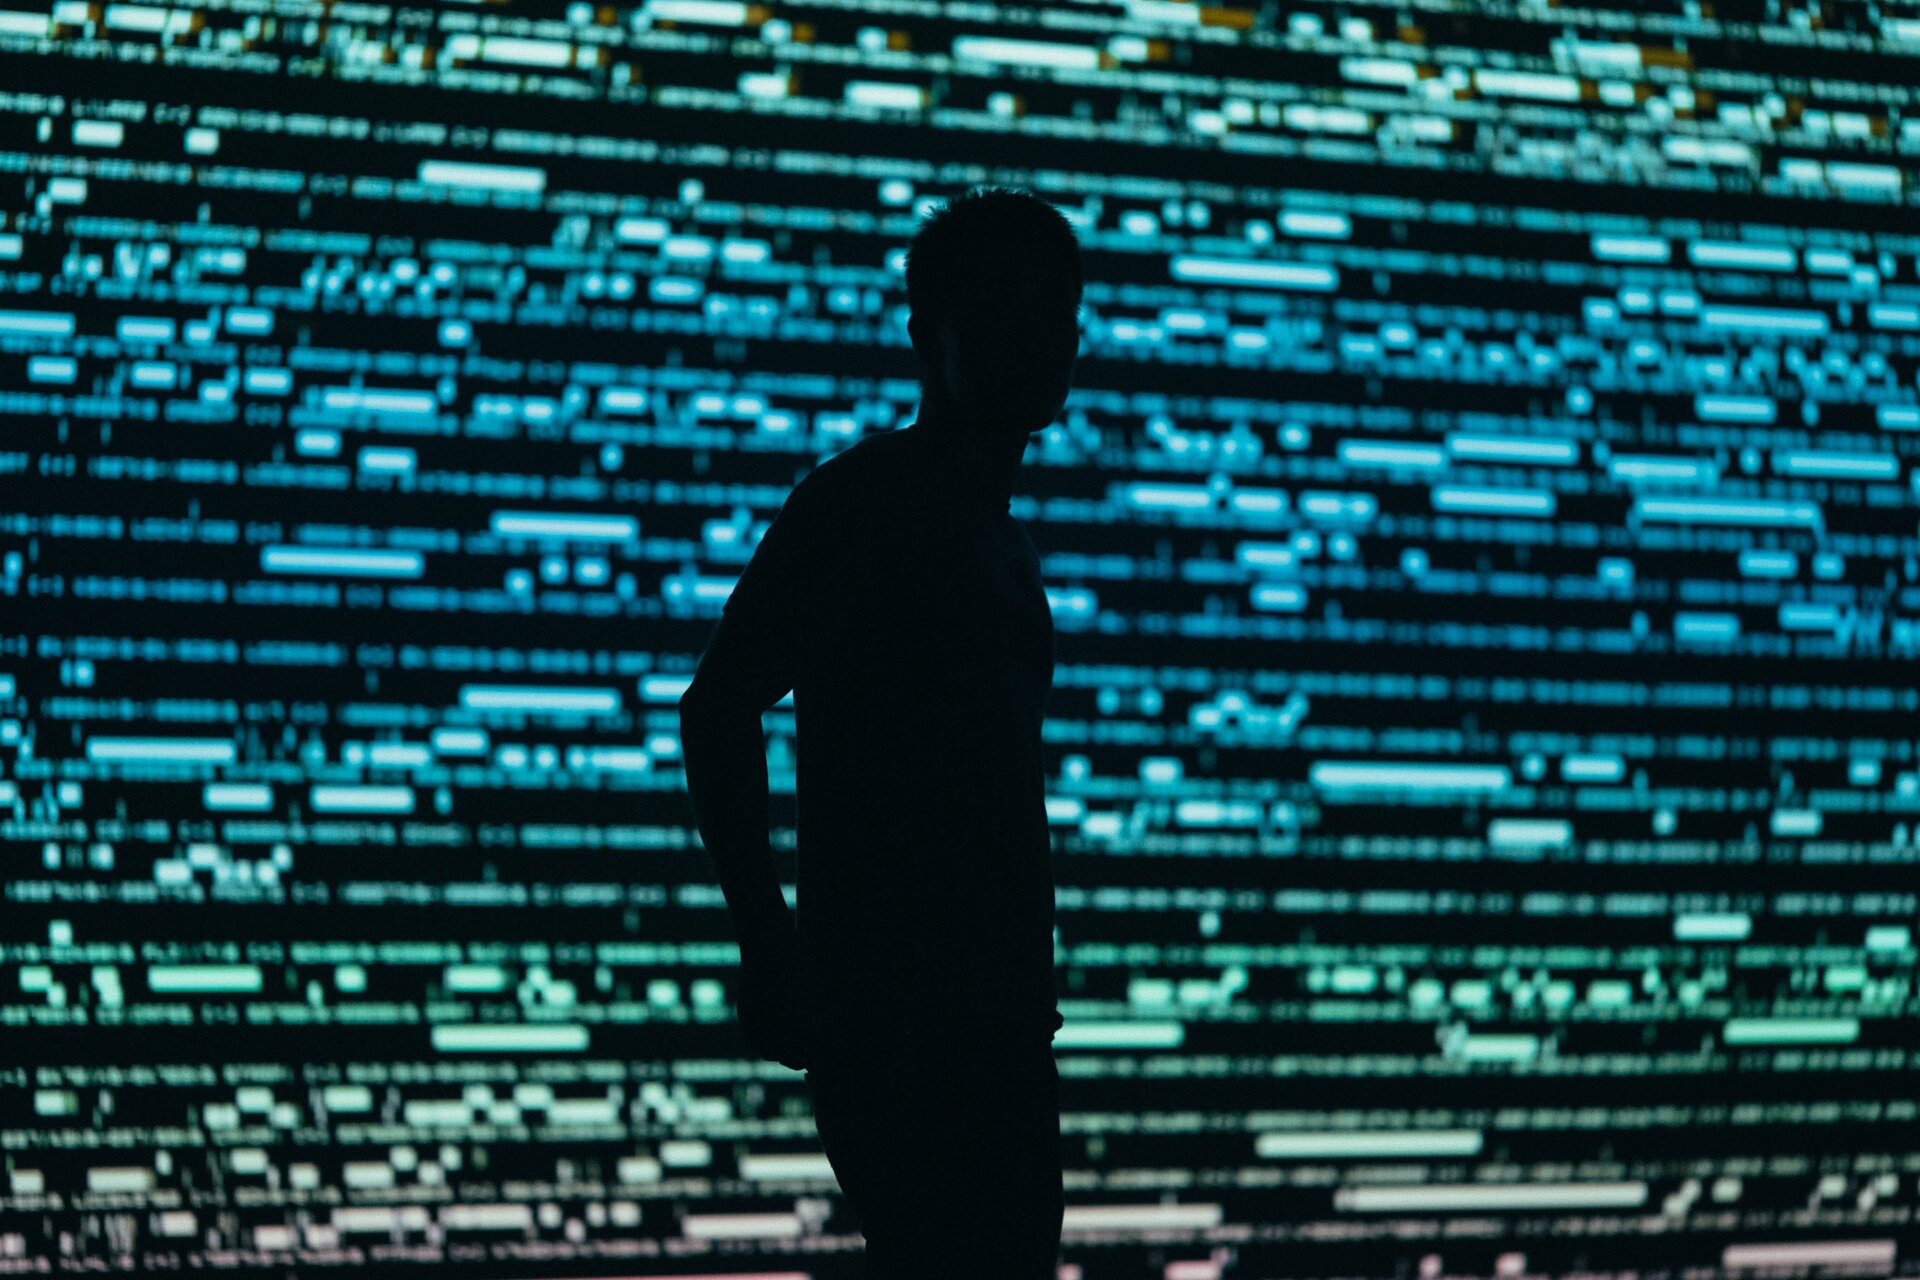 Silhouette photograph of man surveillance privacy Photo by Chris Yang on Unsplash